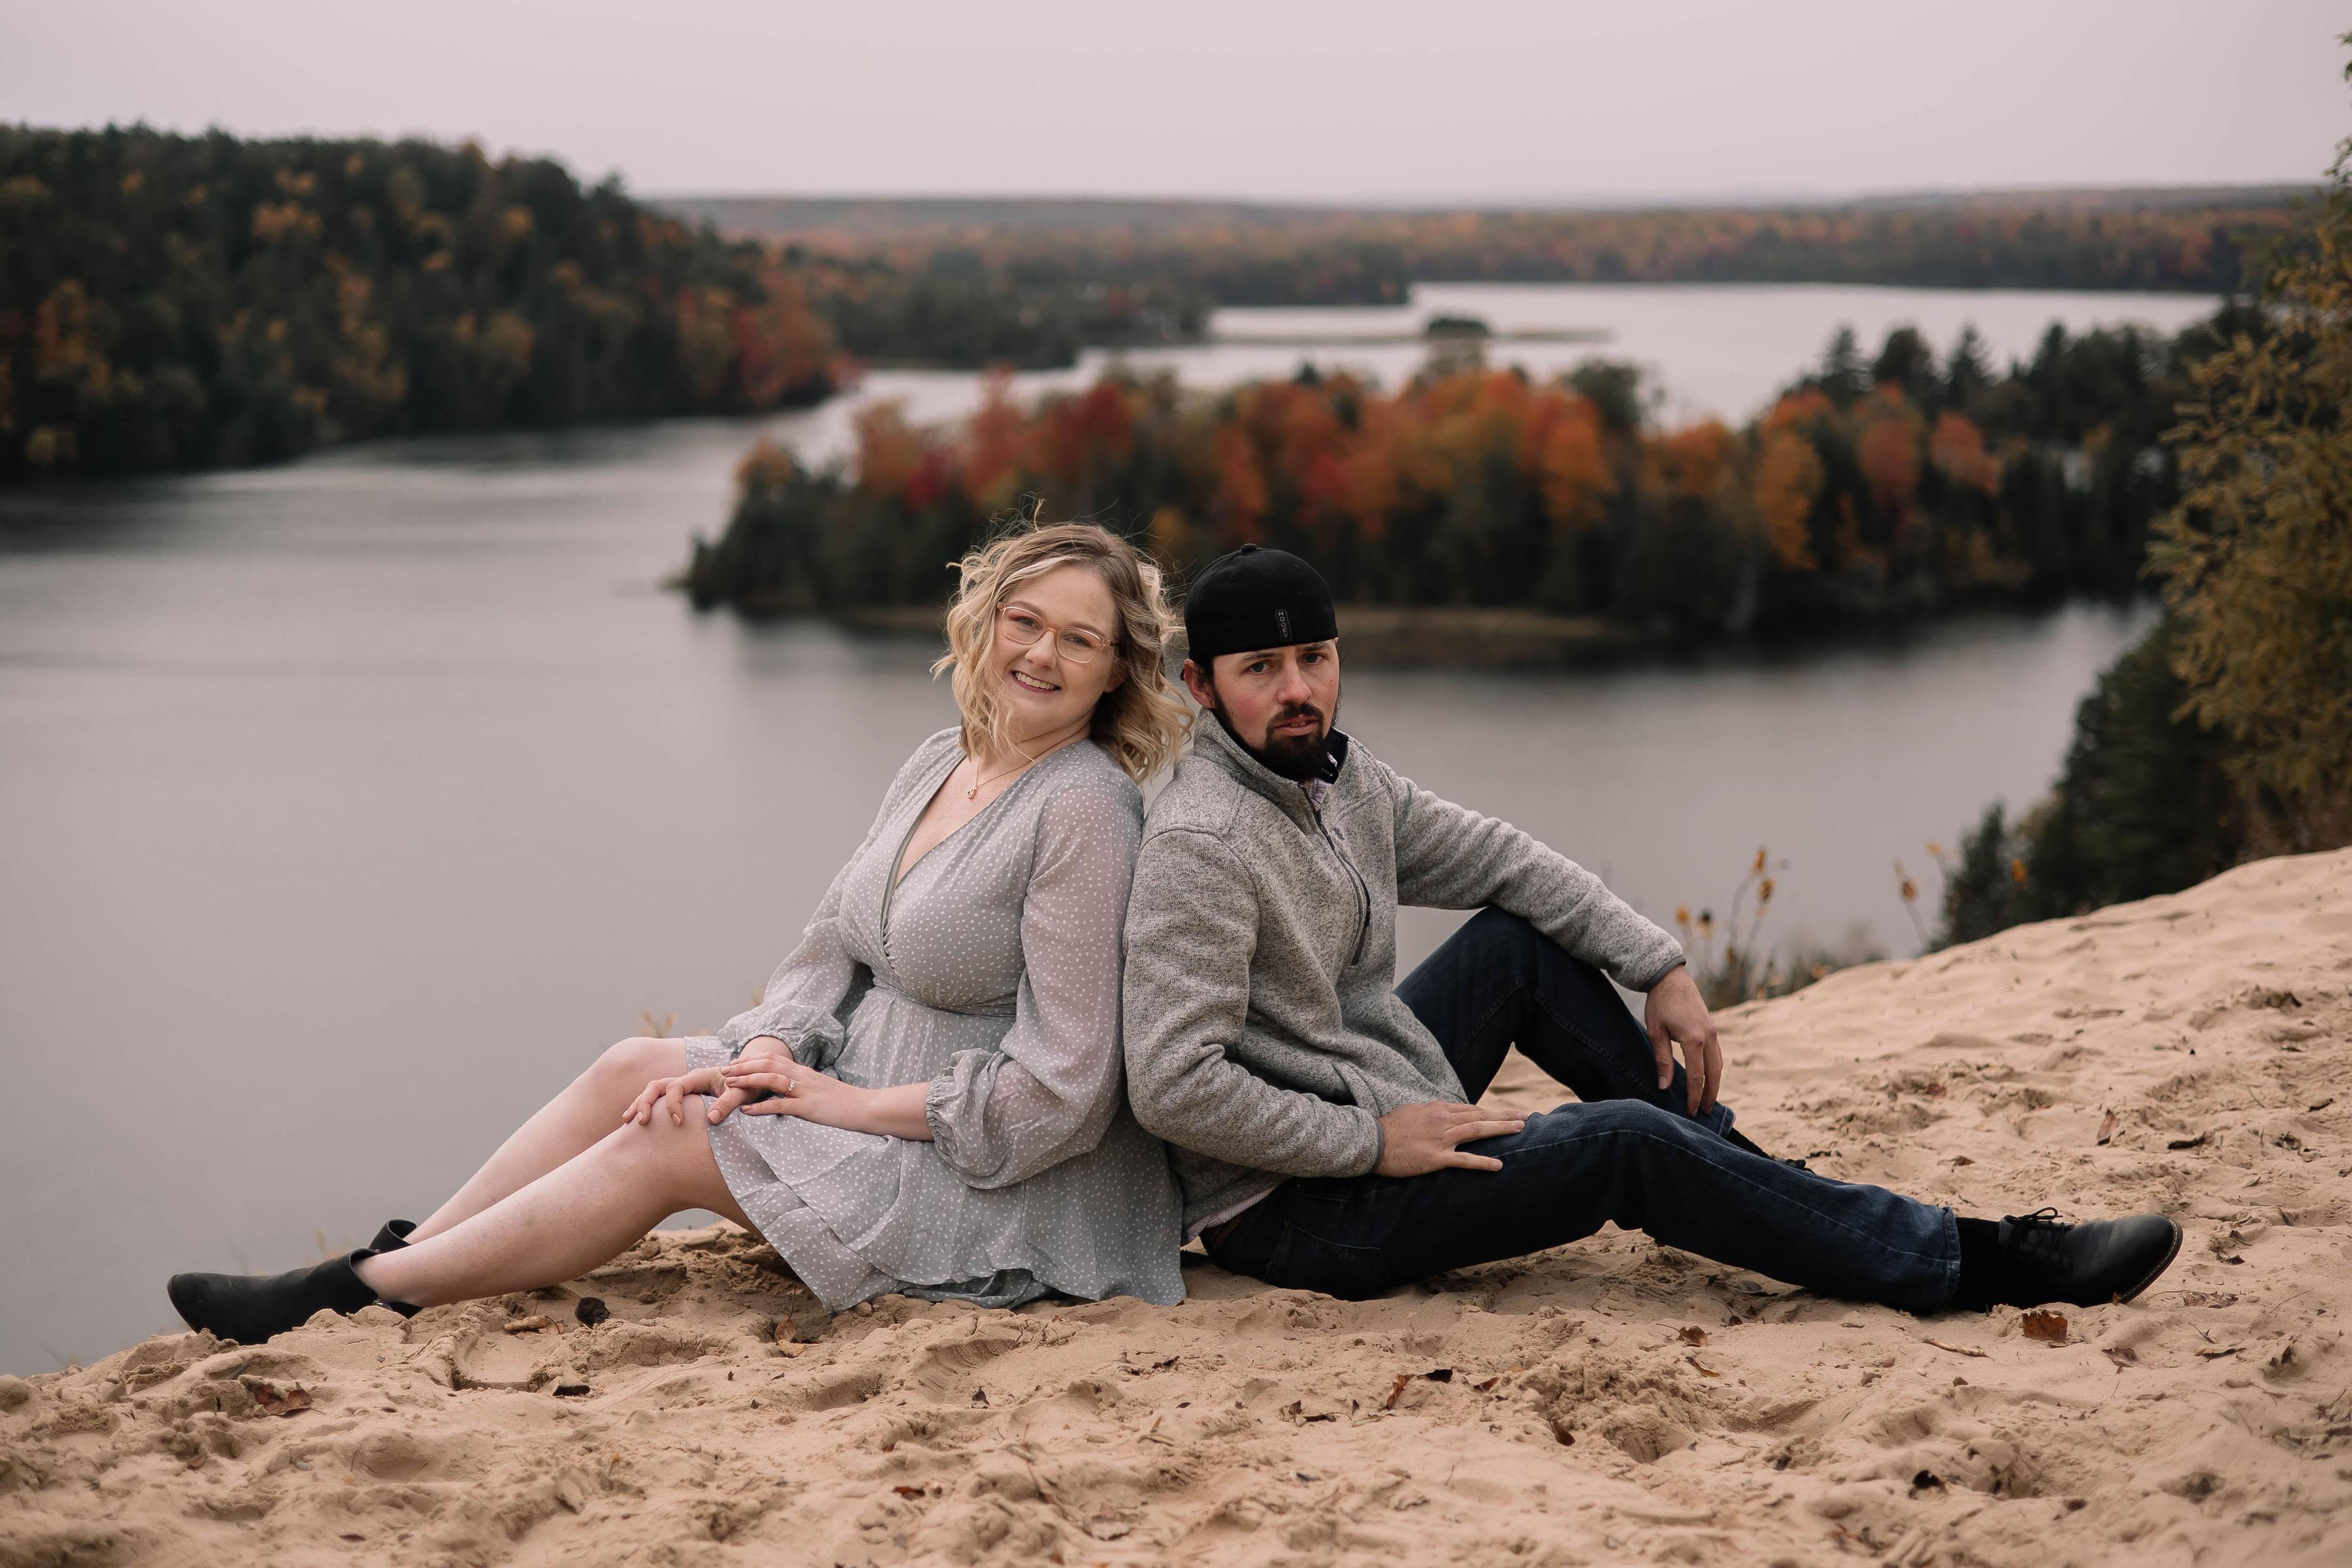 The Wedding Website of Rachelle Maher and Kyle Miller